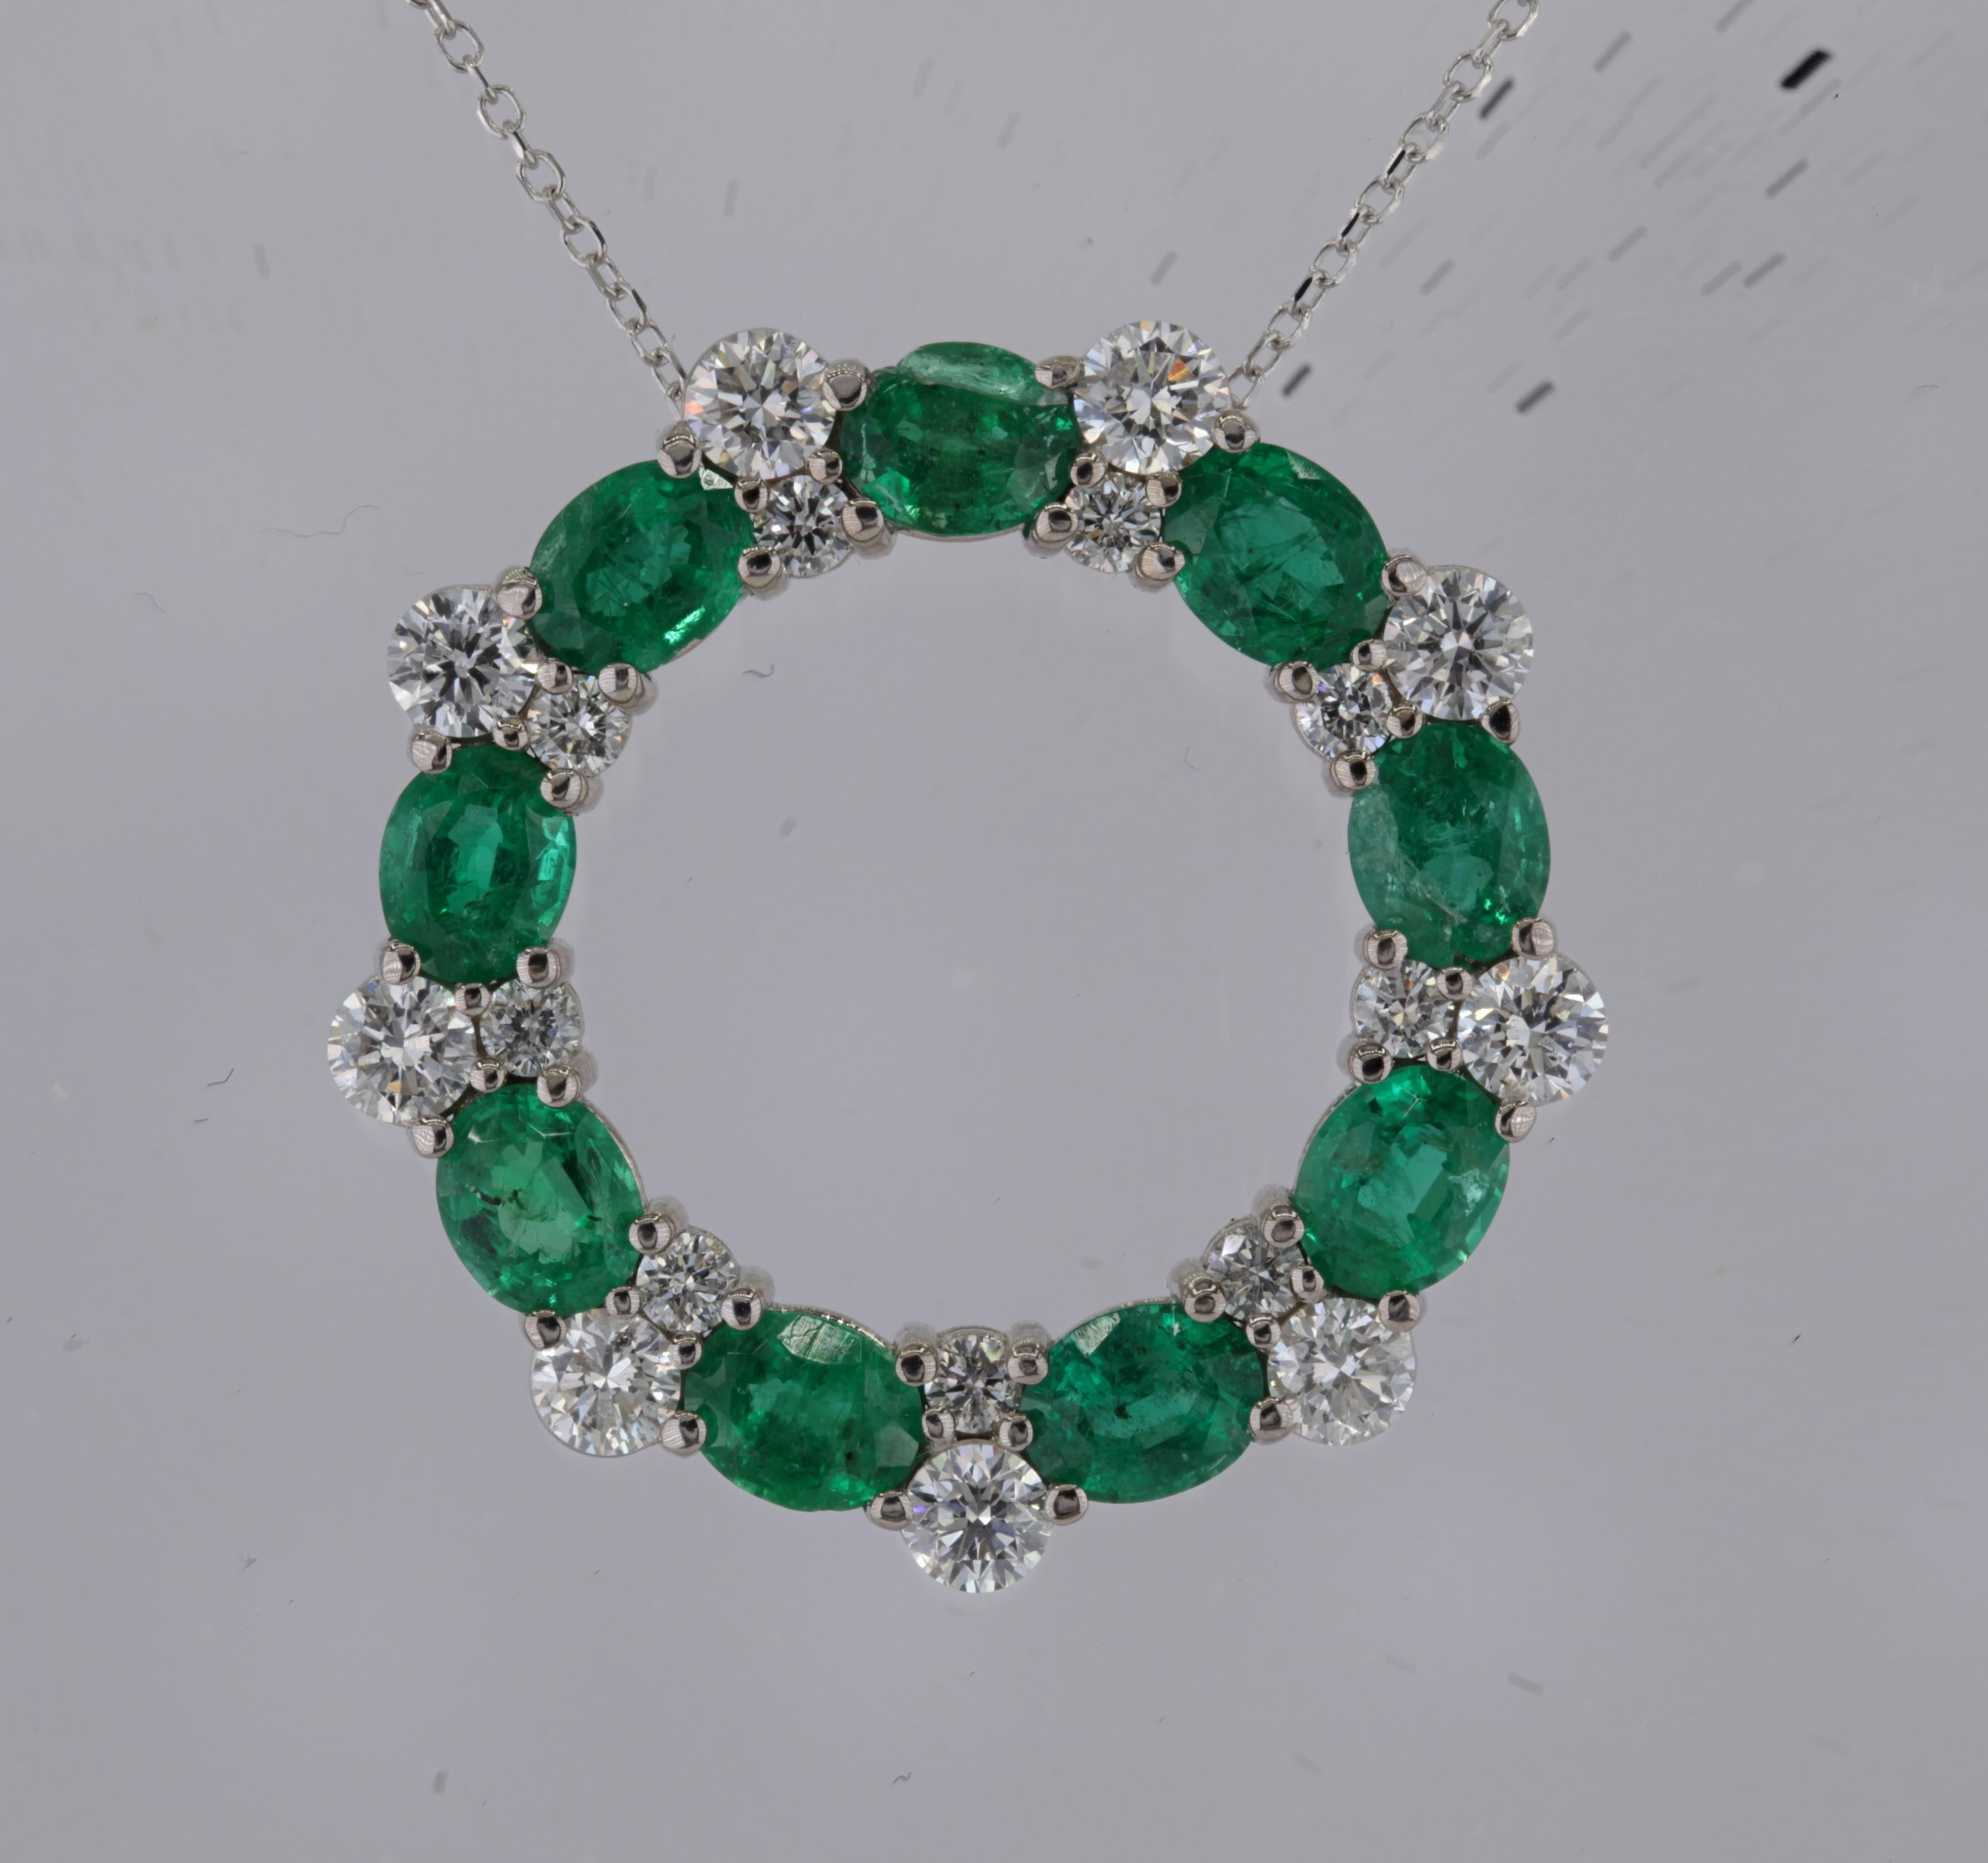 Adorn yourself with the enchanting allure of nature's vibrant hues and sparkling brilliance. Our circle pendant, a true masterpiece, features nine exquisite oval-cut emeralds, totaling 2.75 carats. Each emerald, measuring 5x4mm, captures the rich